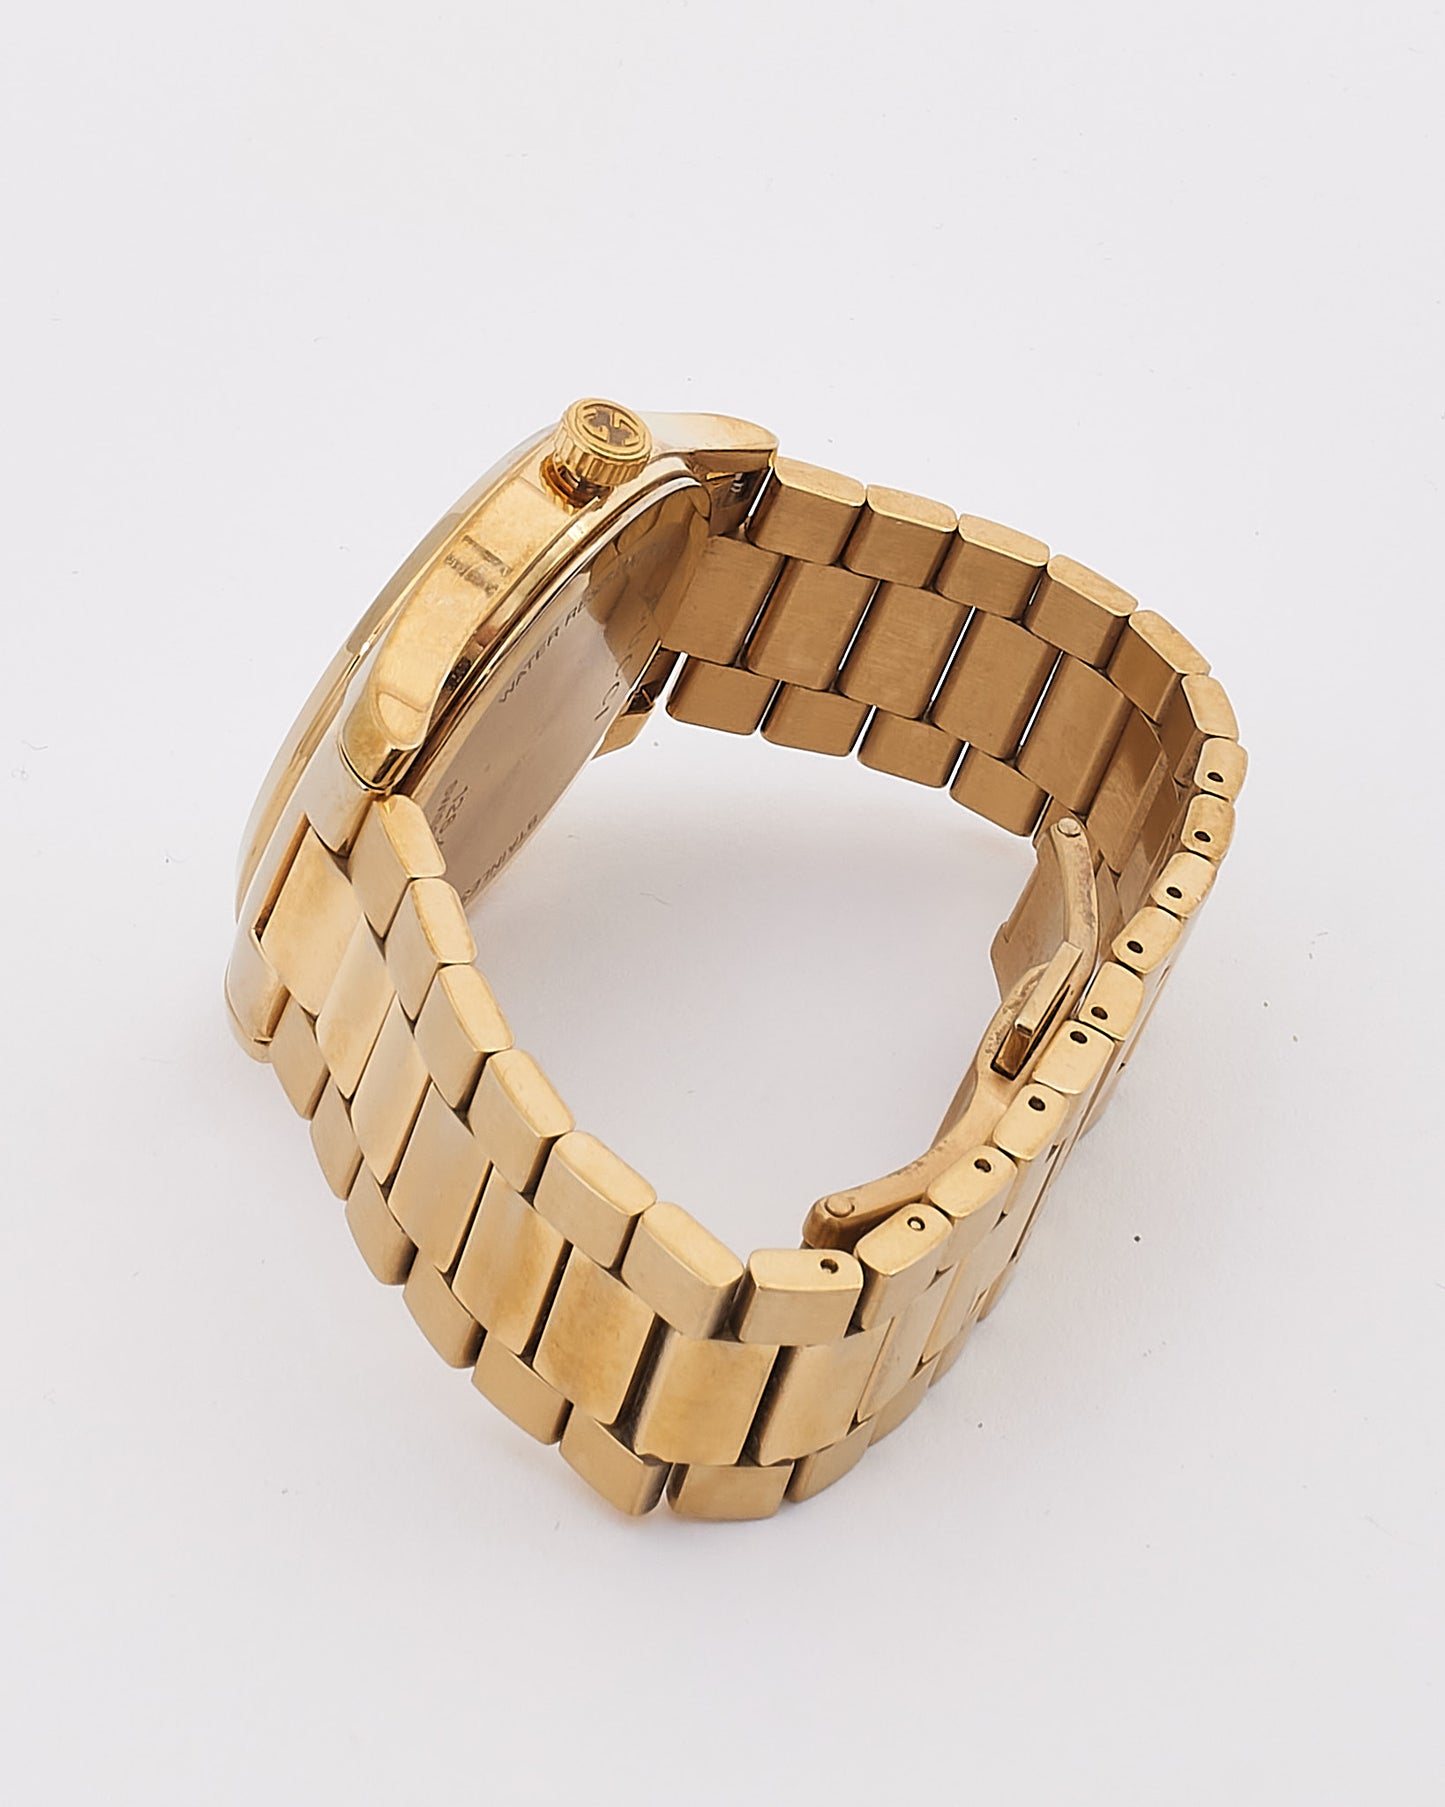 Gucci Gold G-Timeless Stainless Steel 36mm Watch